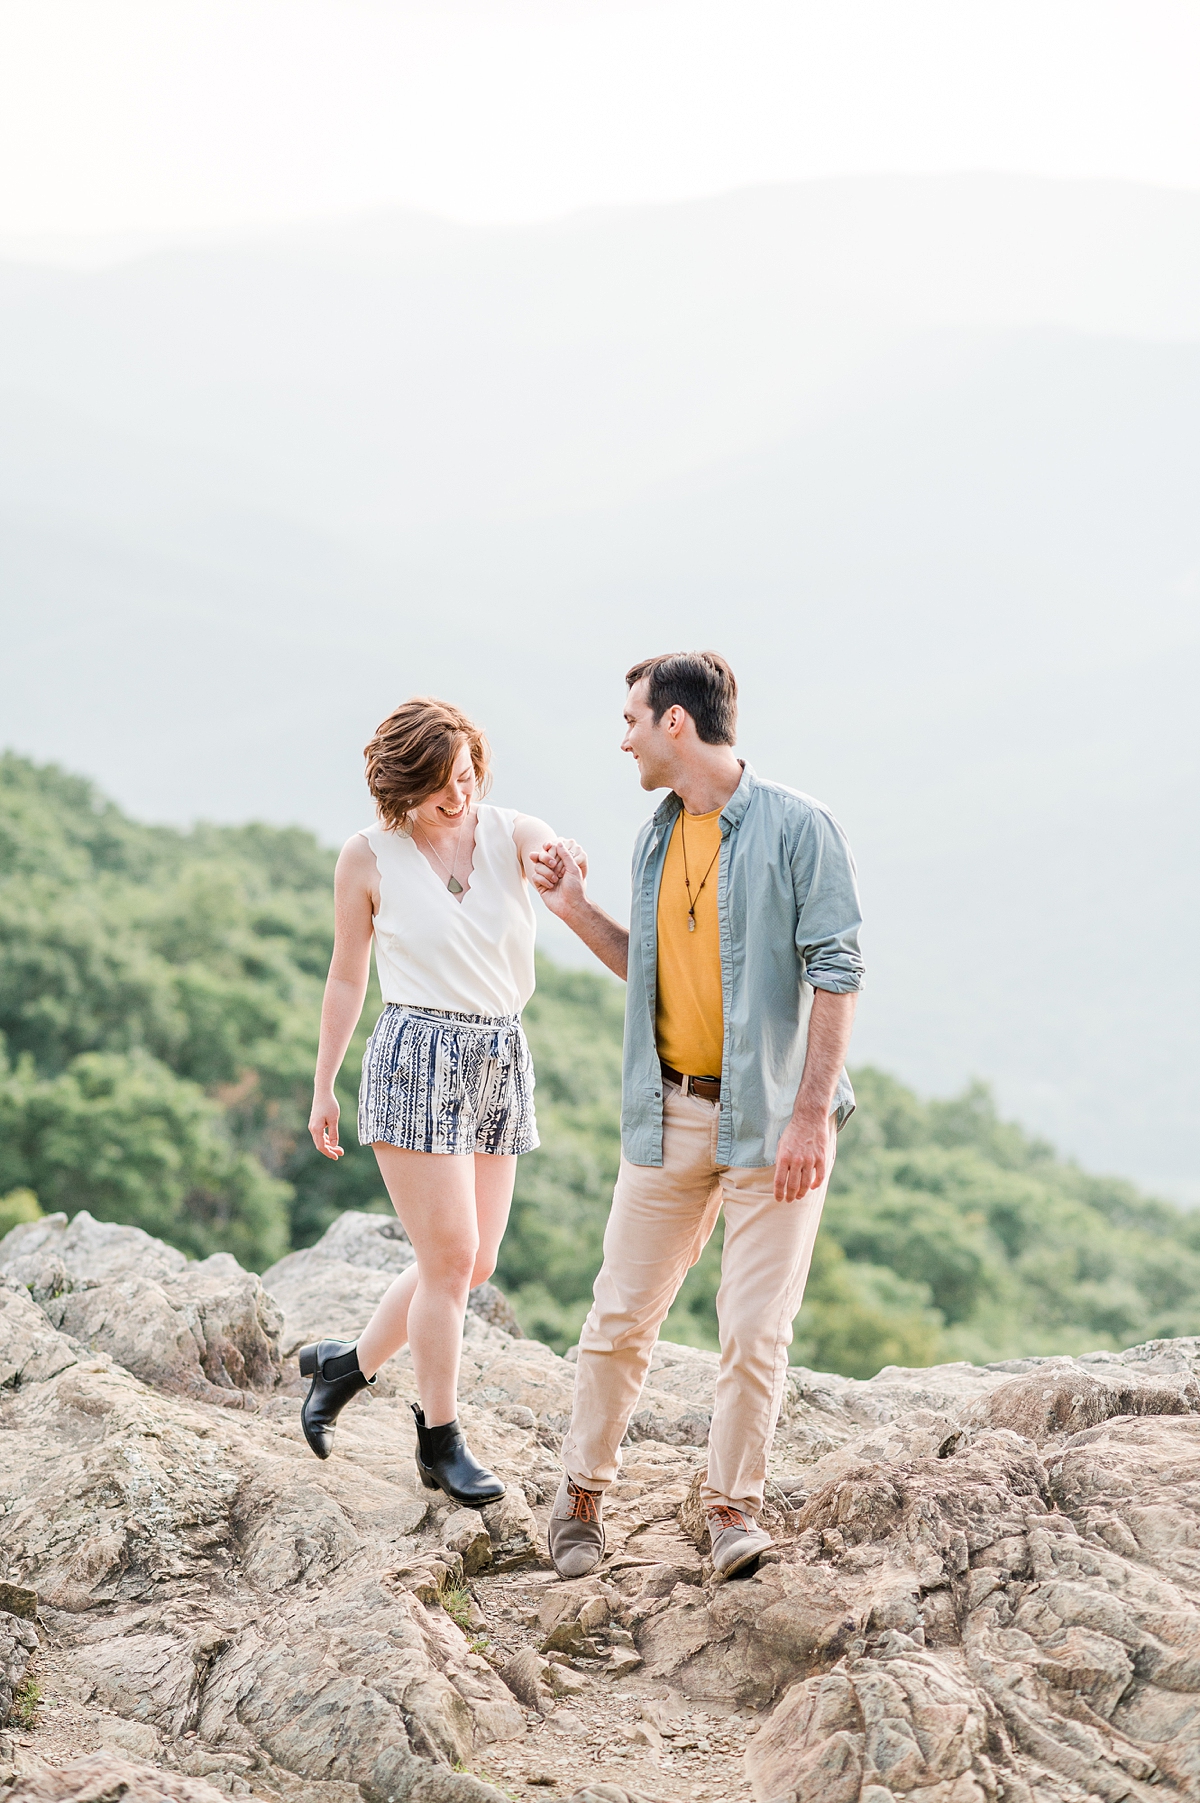 A Summer Raven's Roost Overlook Engagement Session with Mountain Views by Virginia Wedding Photographer Kailey Brianne Photography. 